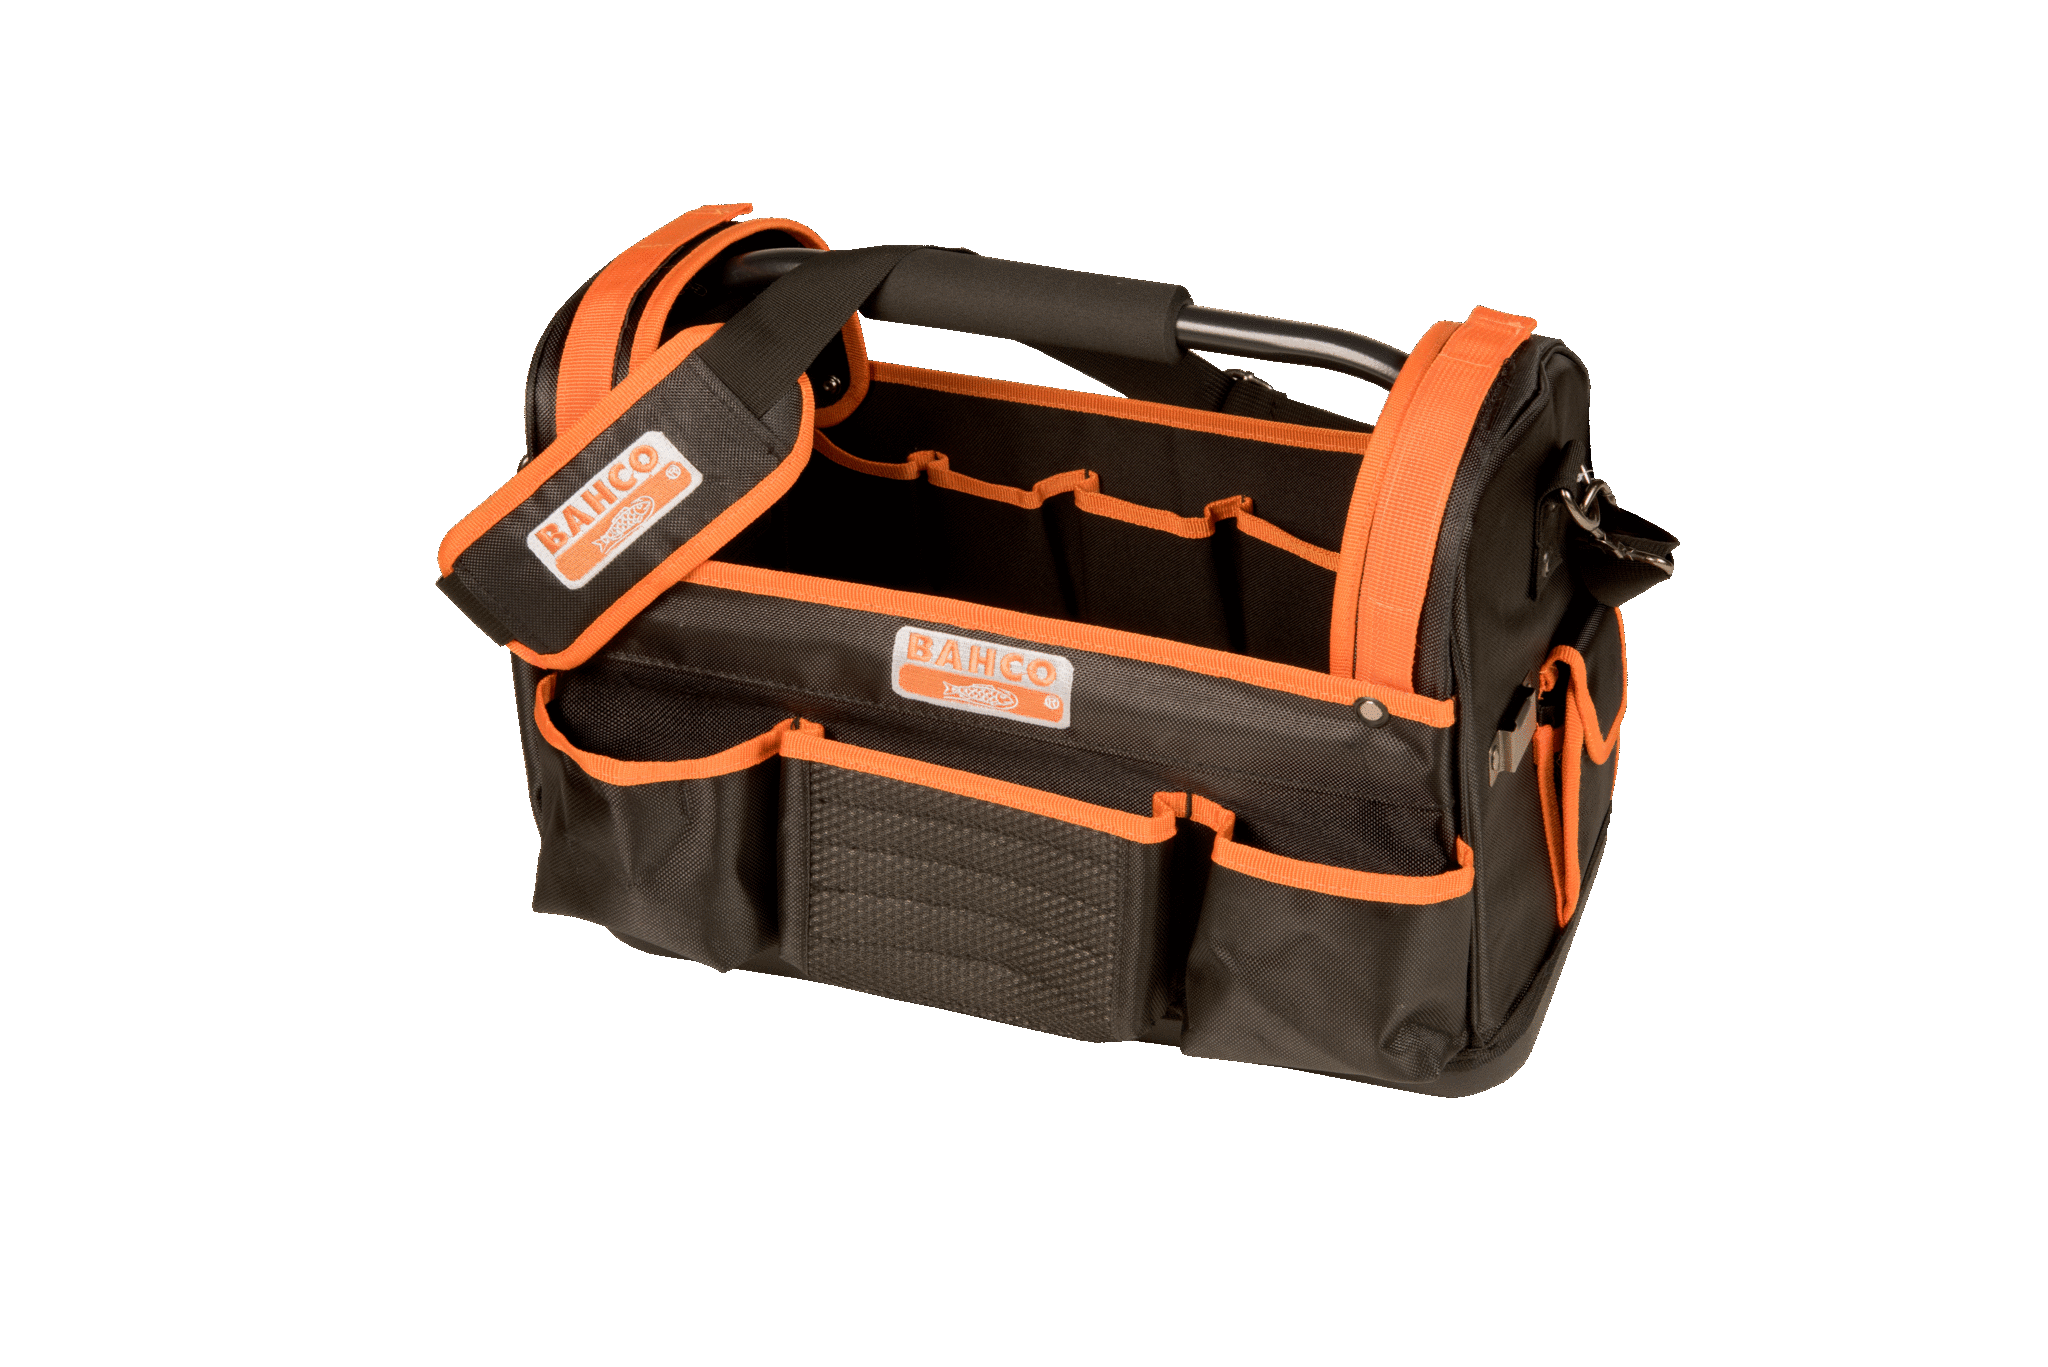 24 L Open Top Fabric Tool Bags with Rigid Base - 3100TB by Bahco